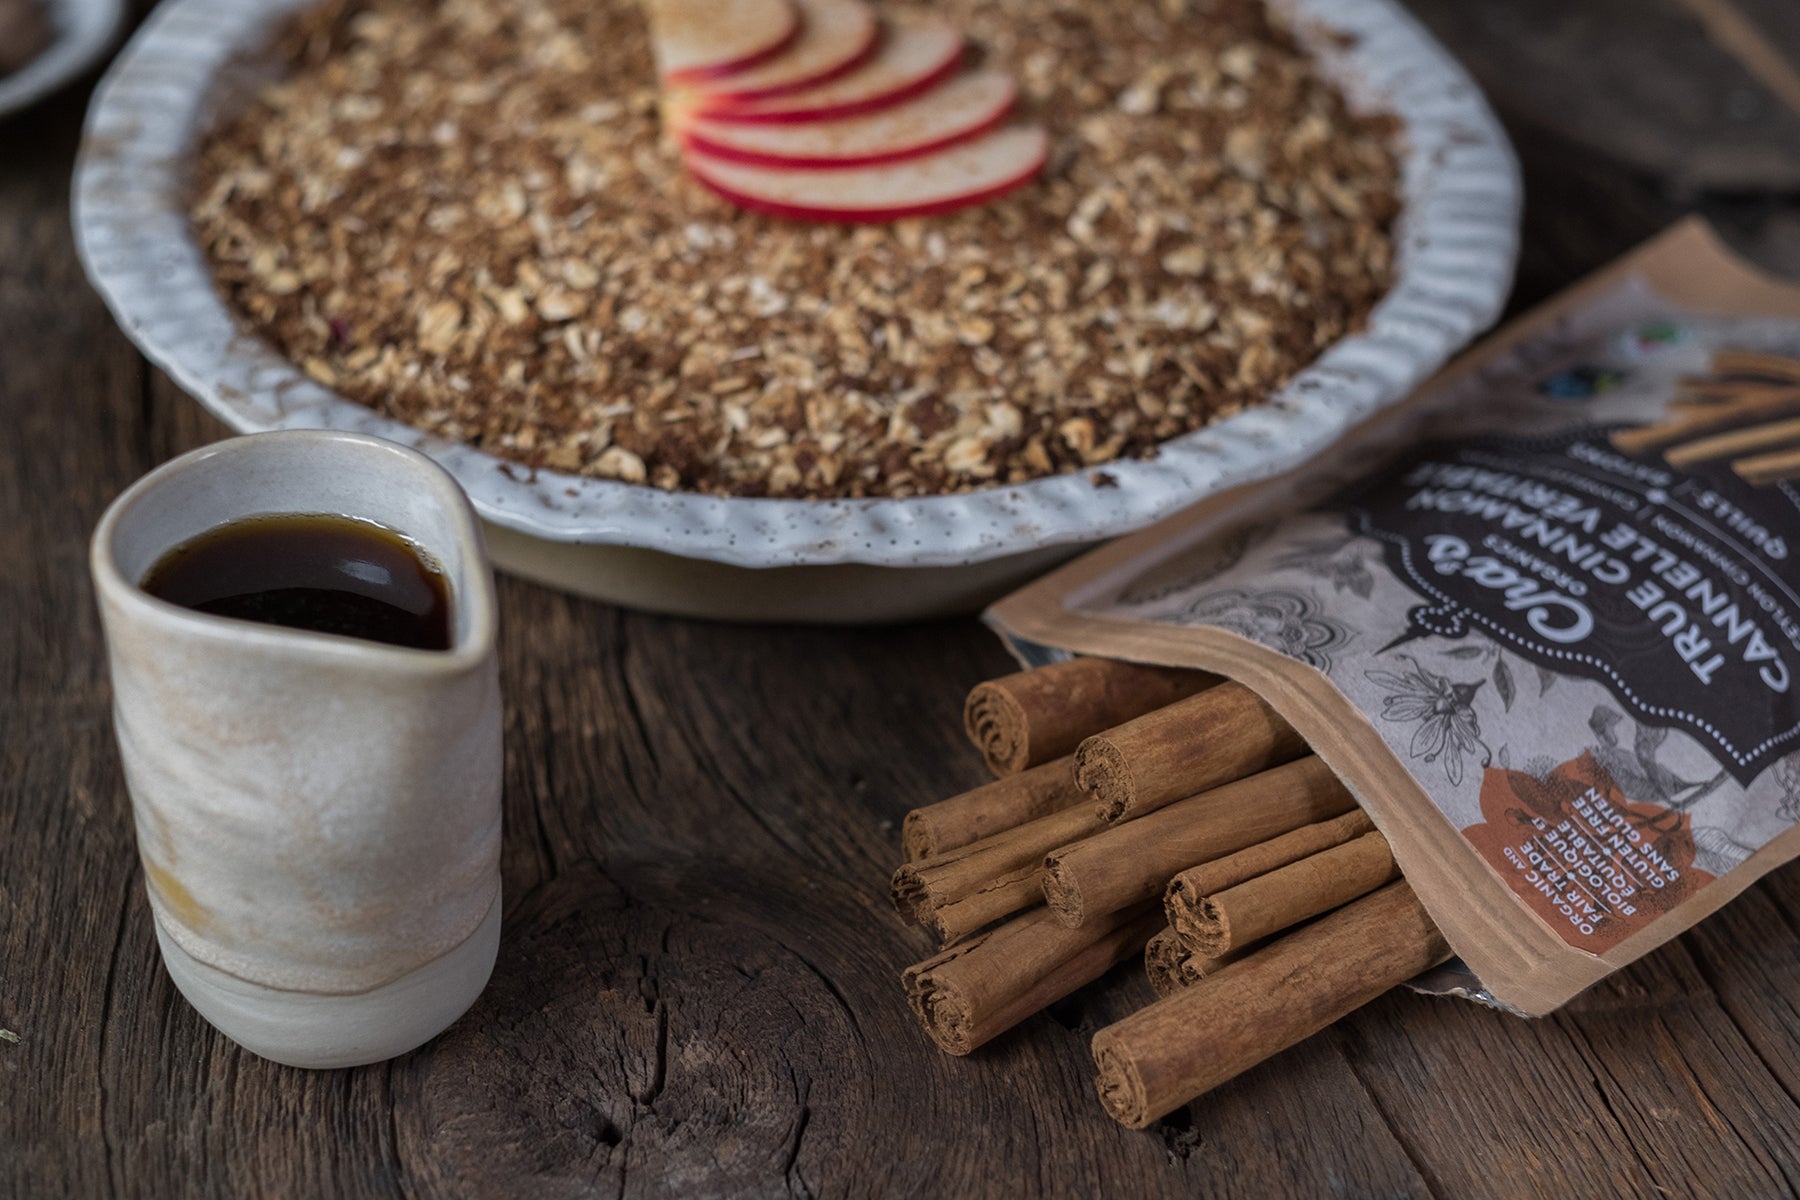 Photograph of Cha's Organics cinnamon sticks opened with a few sticks spilling out onto a wood surface. Beside it is a small vessel of maple syrup and a bowl of hot cereal in the background, slightly out of focus.  